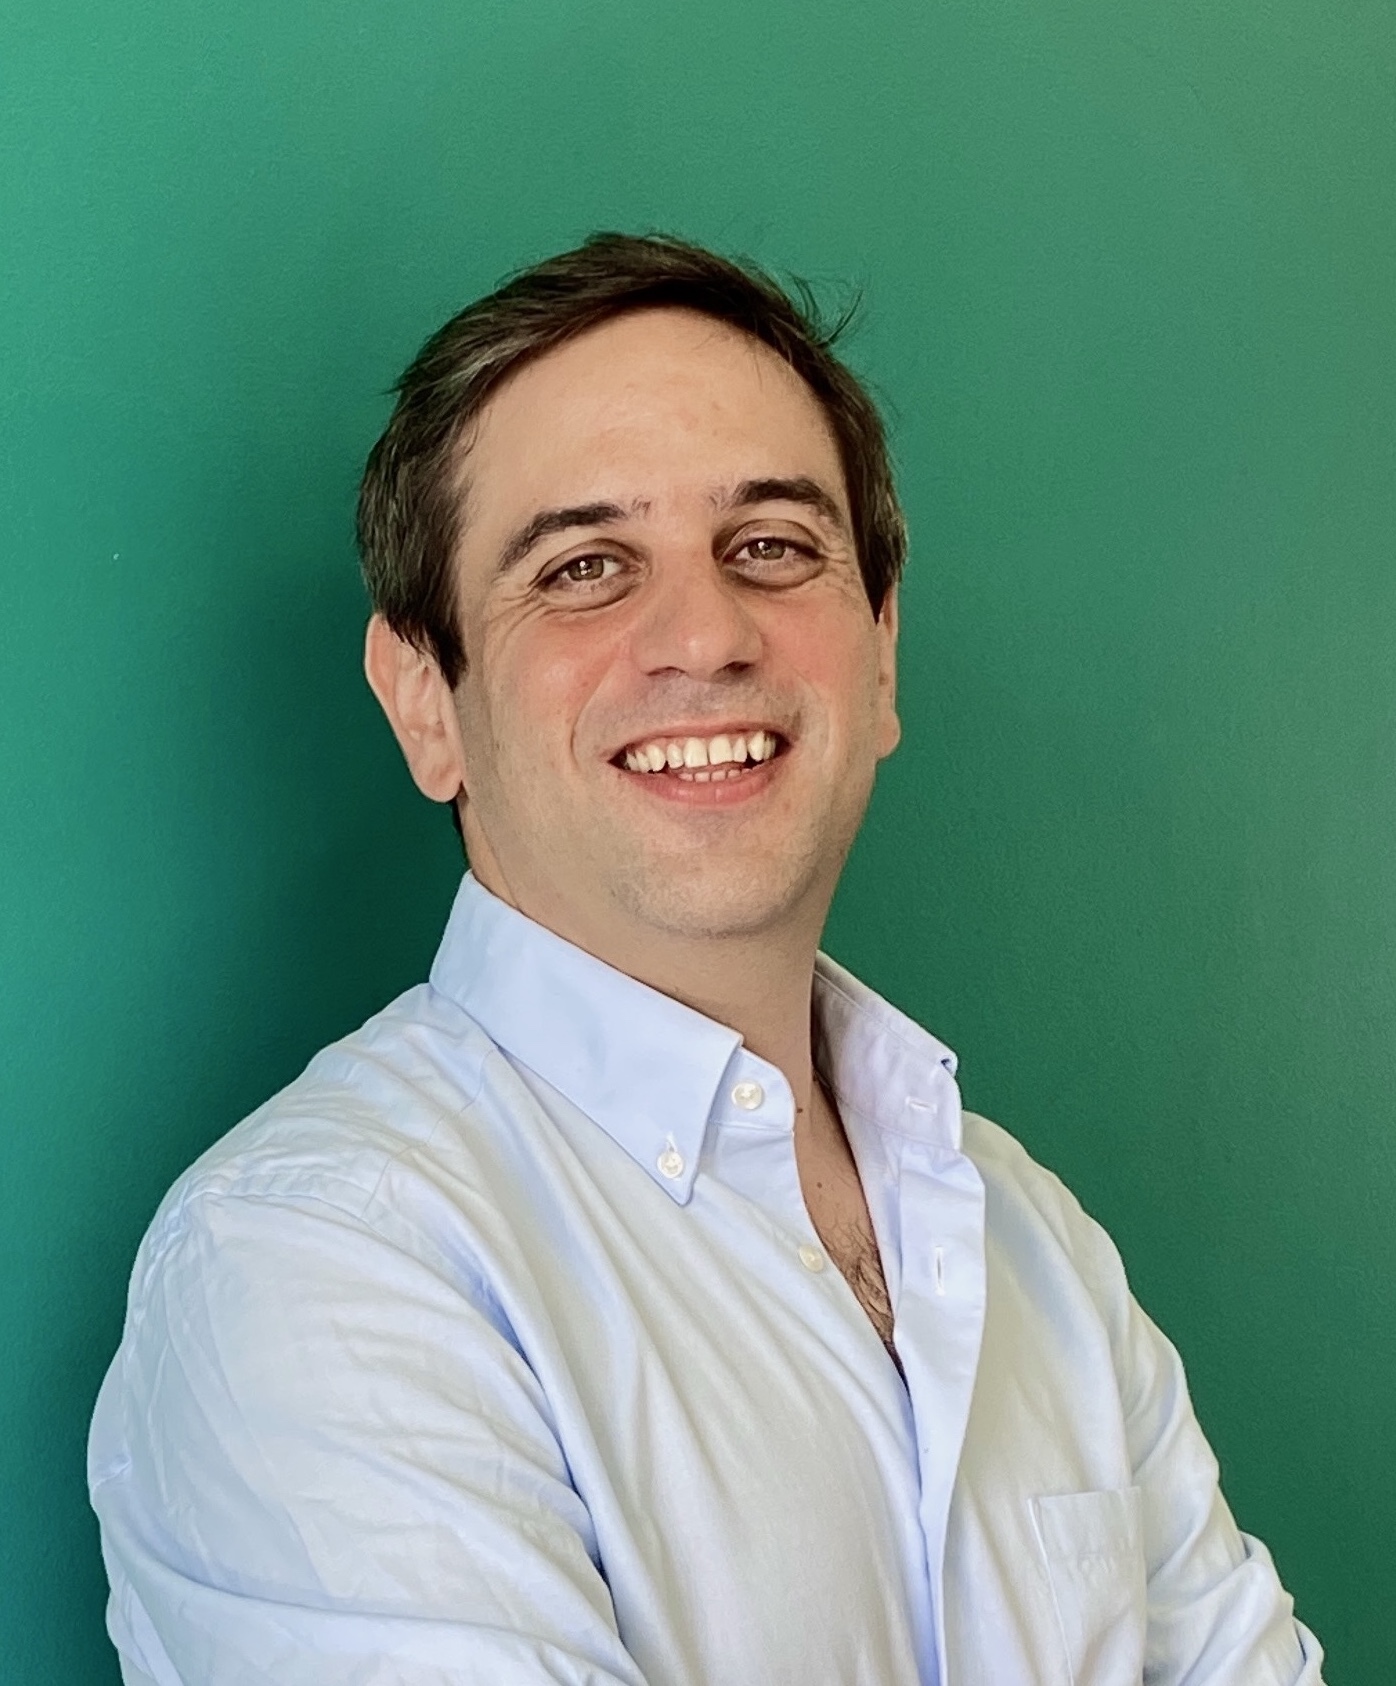 Diogo Quintas, Head of Product